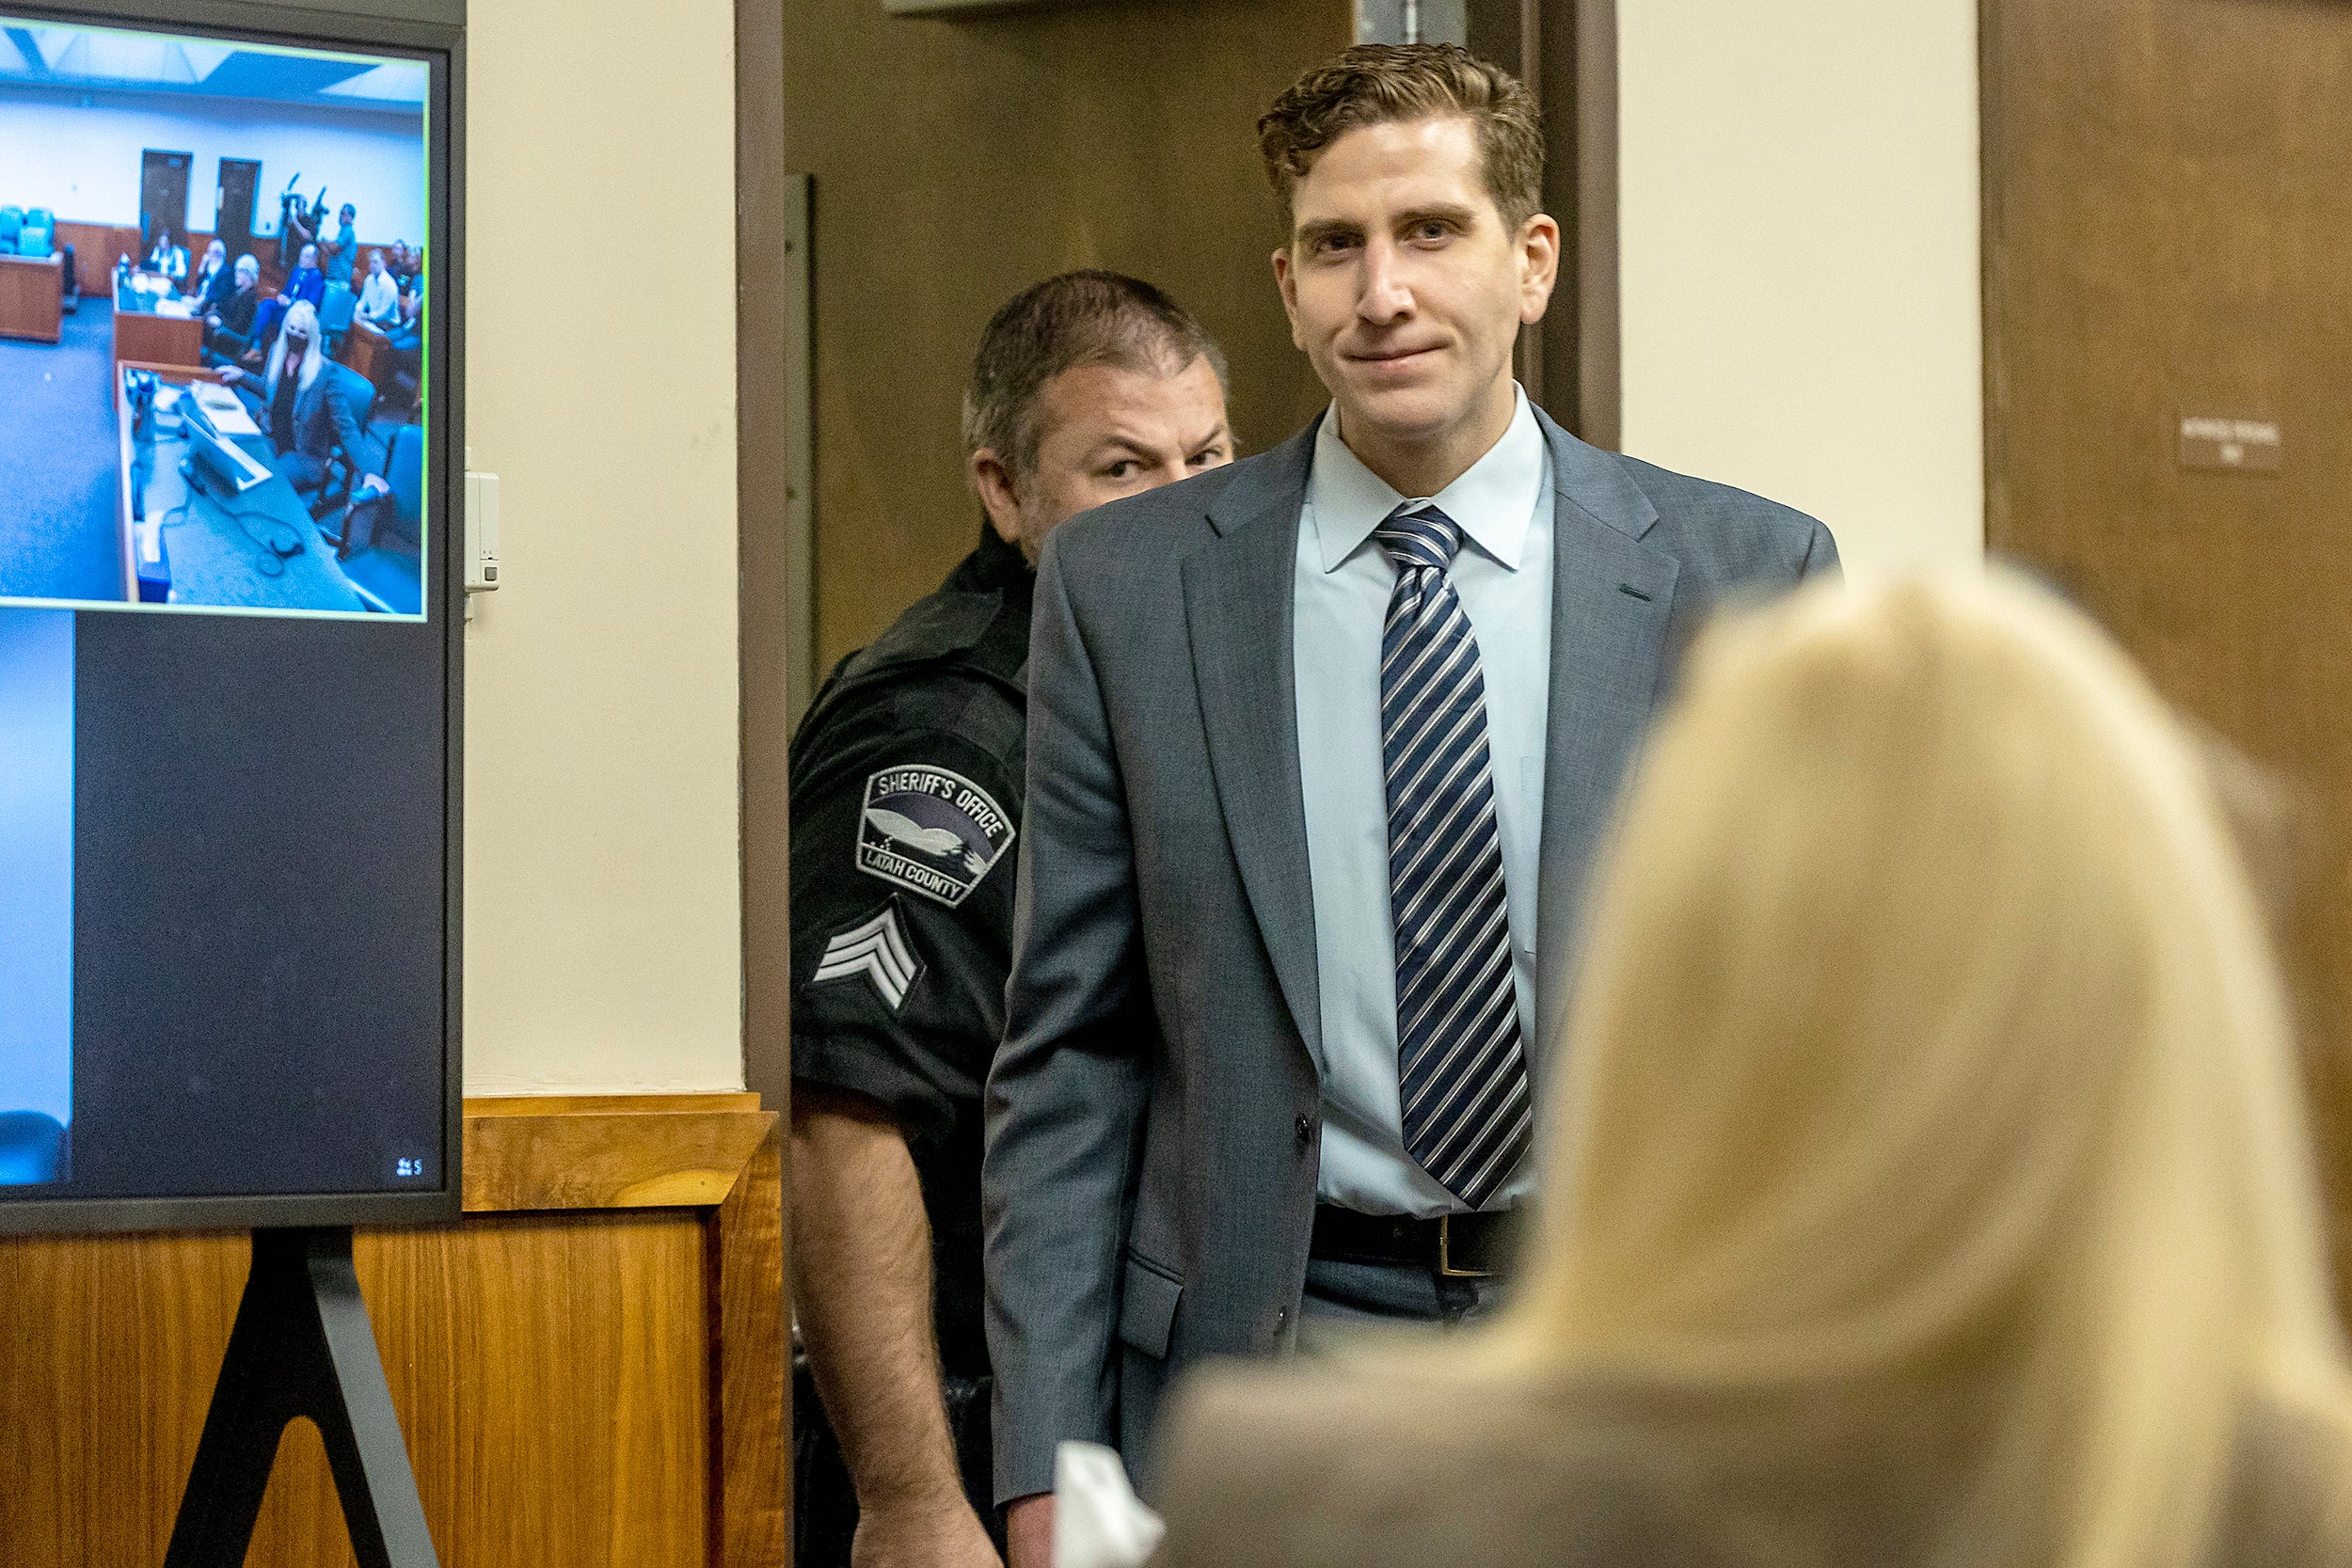 Bryan Kohberger enters the courtroom for a hearing in August at the Latah County Courthouse in Moscow, Idaho